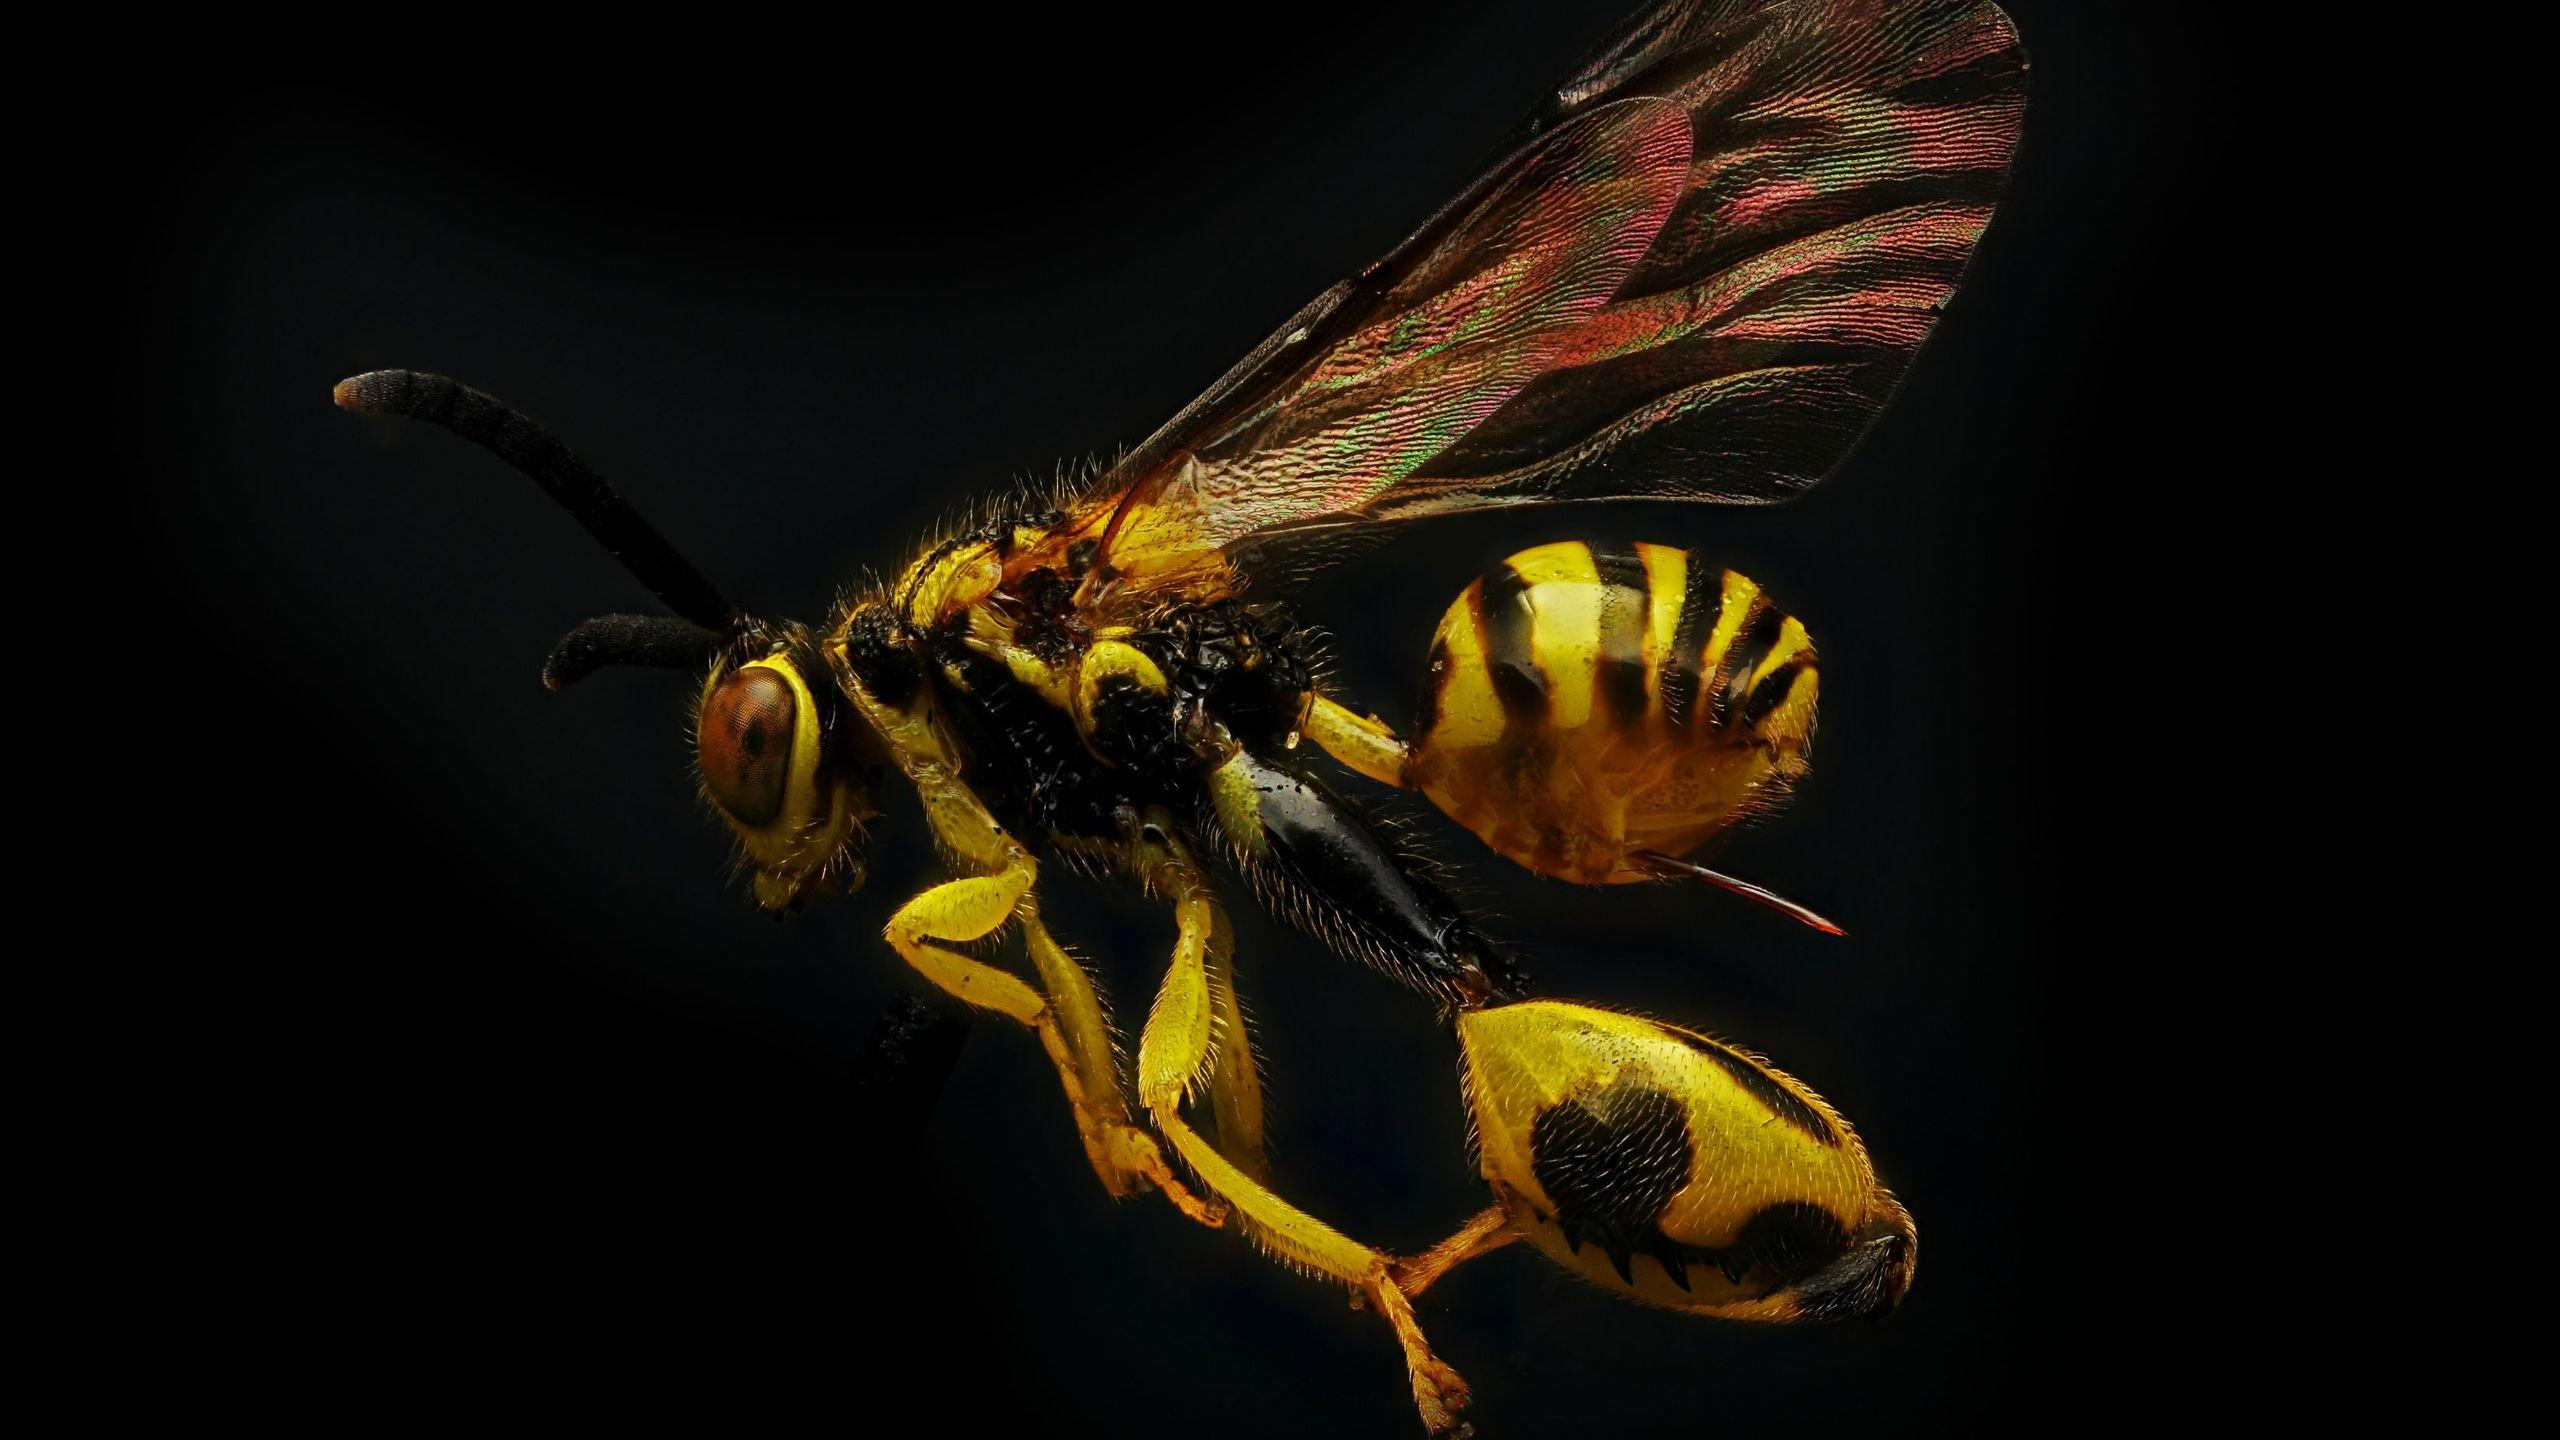 Wasp K wallpapers for your desk 4K or mobile screen free